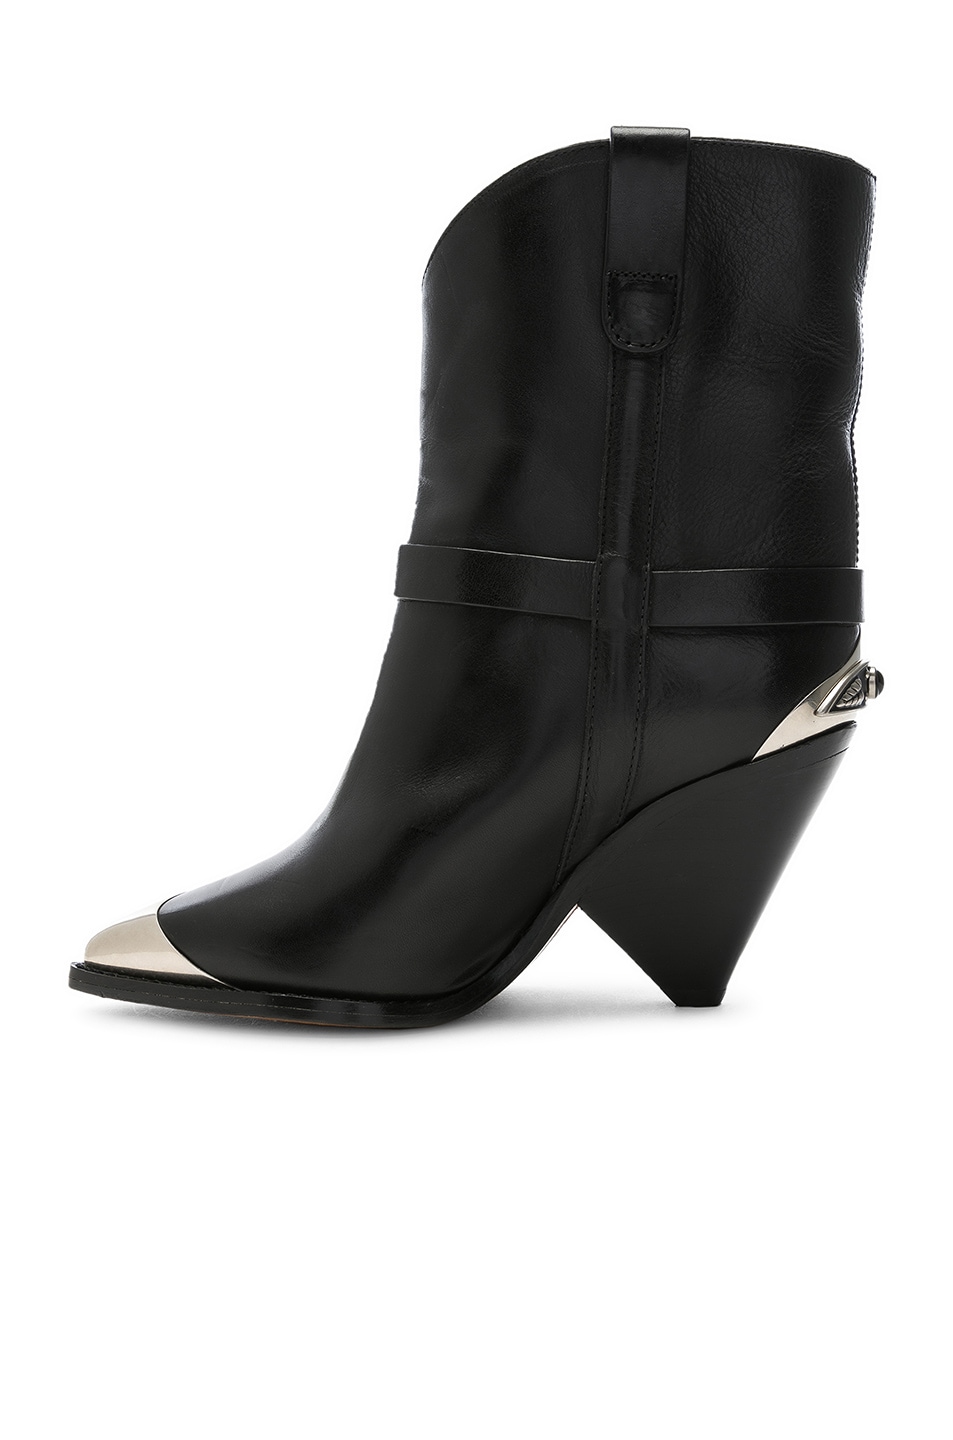 Isabel Marant Leather Lamsy Boots in Black | FWRD